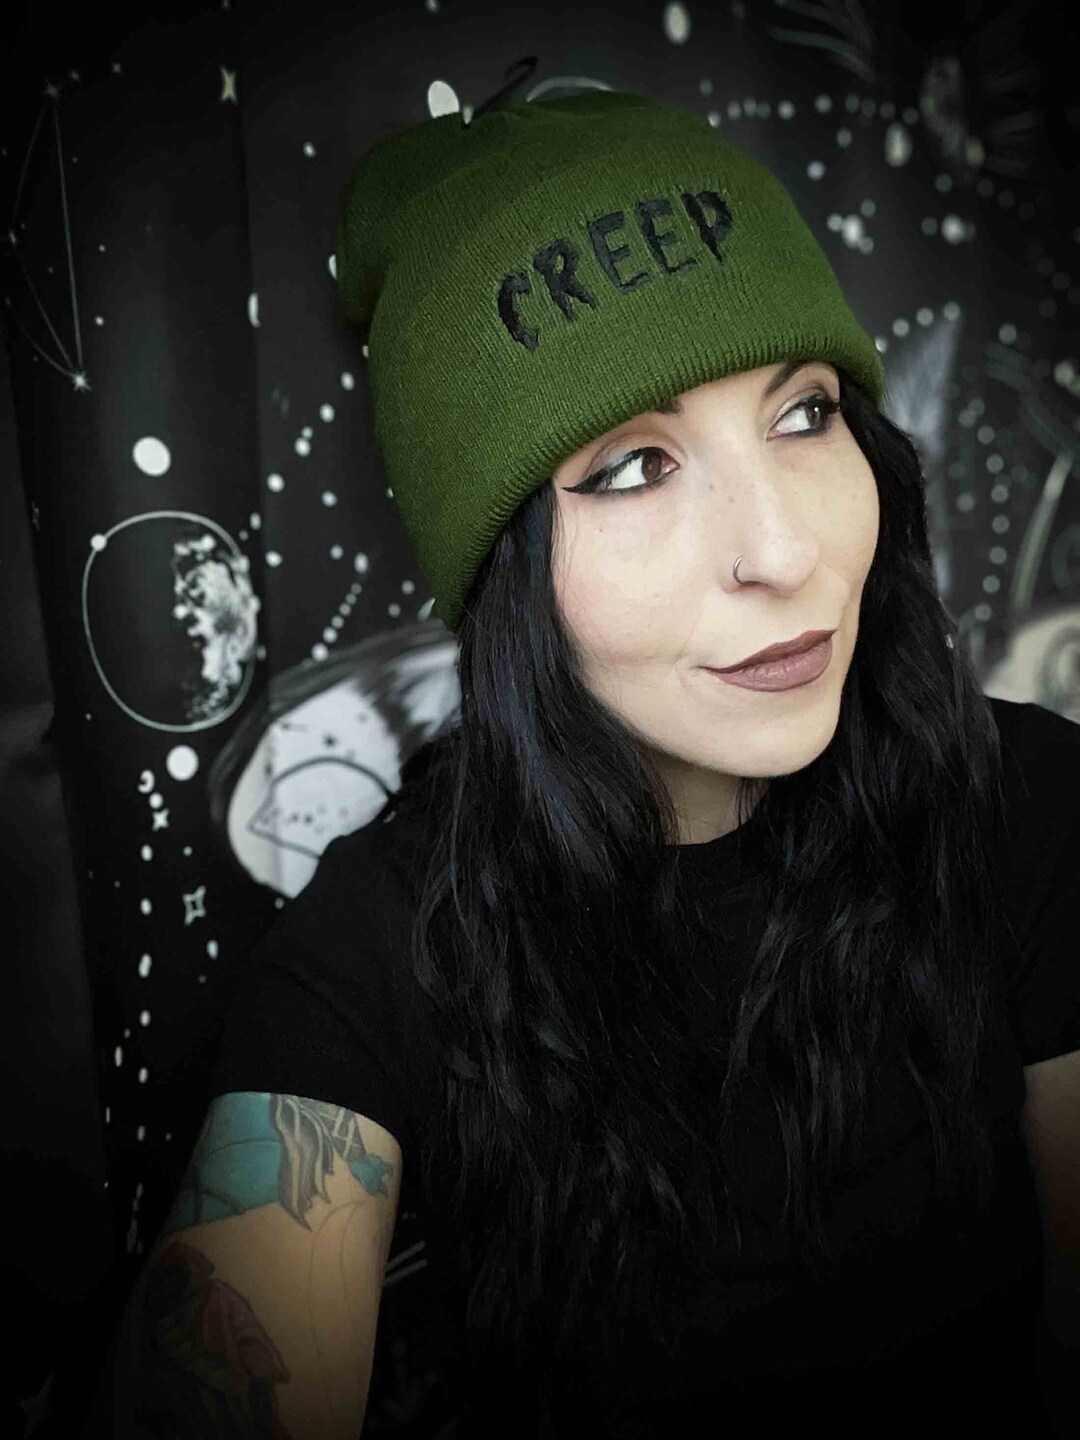 Creep Embroidered Olive Green Beanie Hat - Etsy